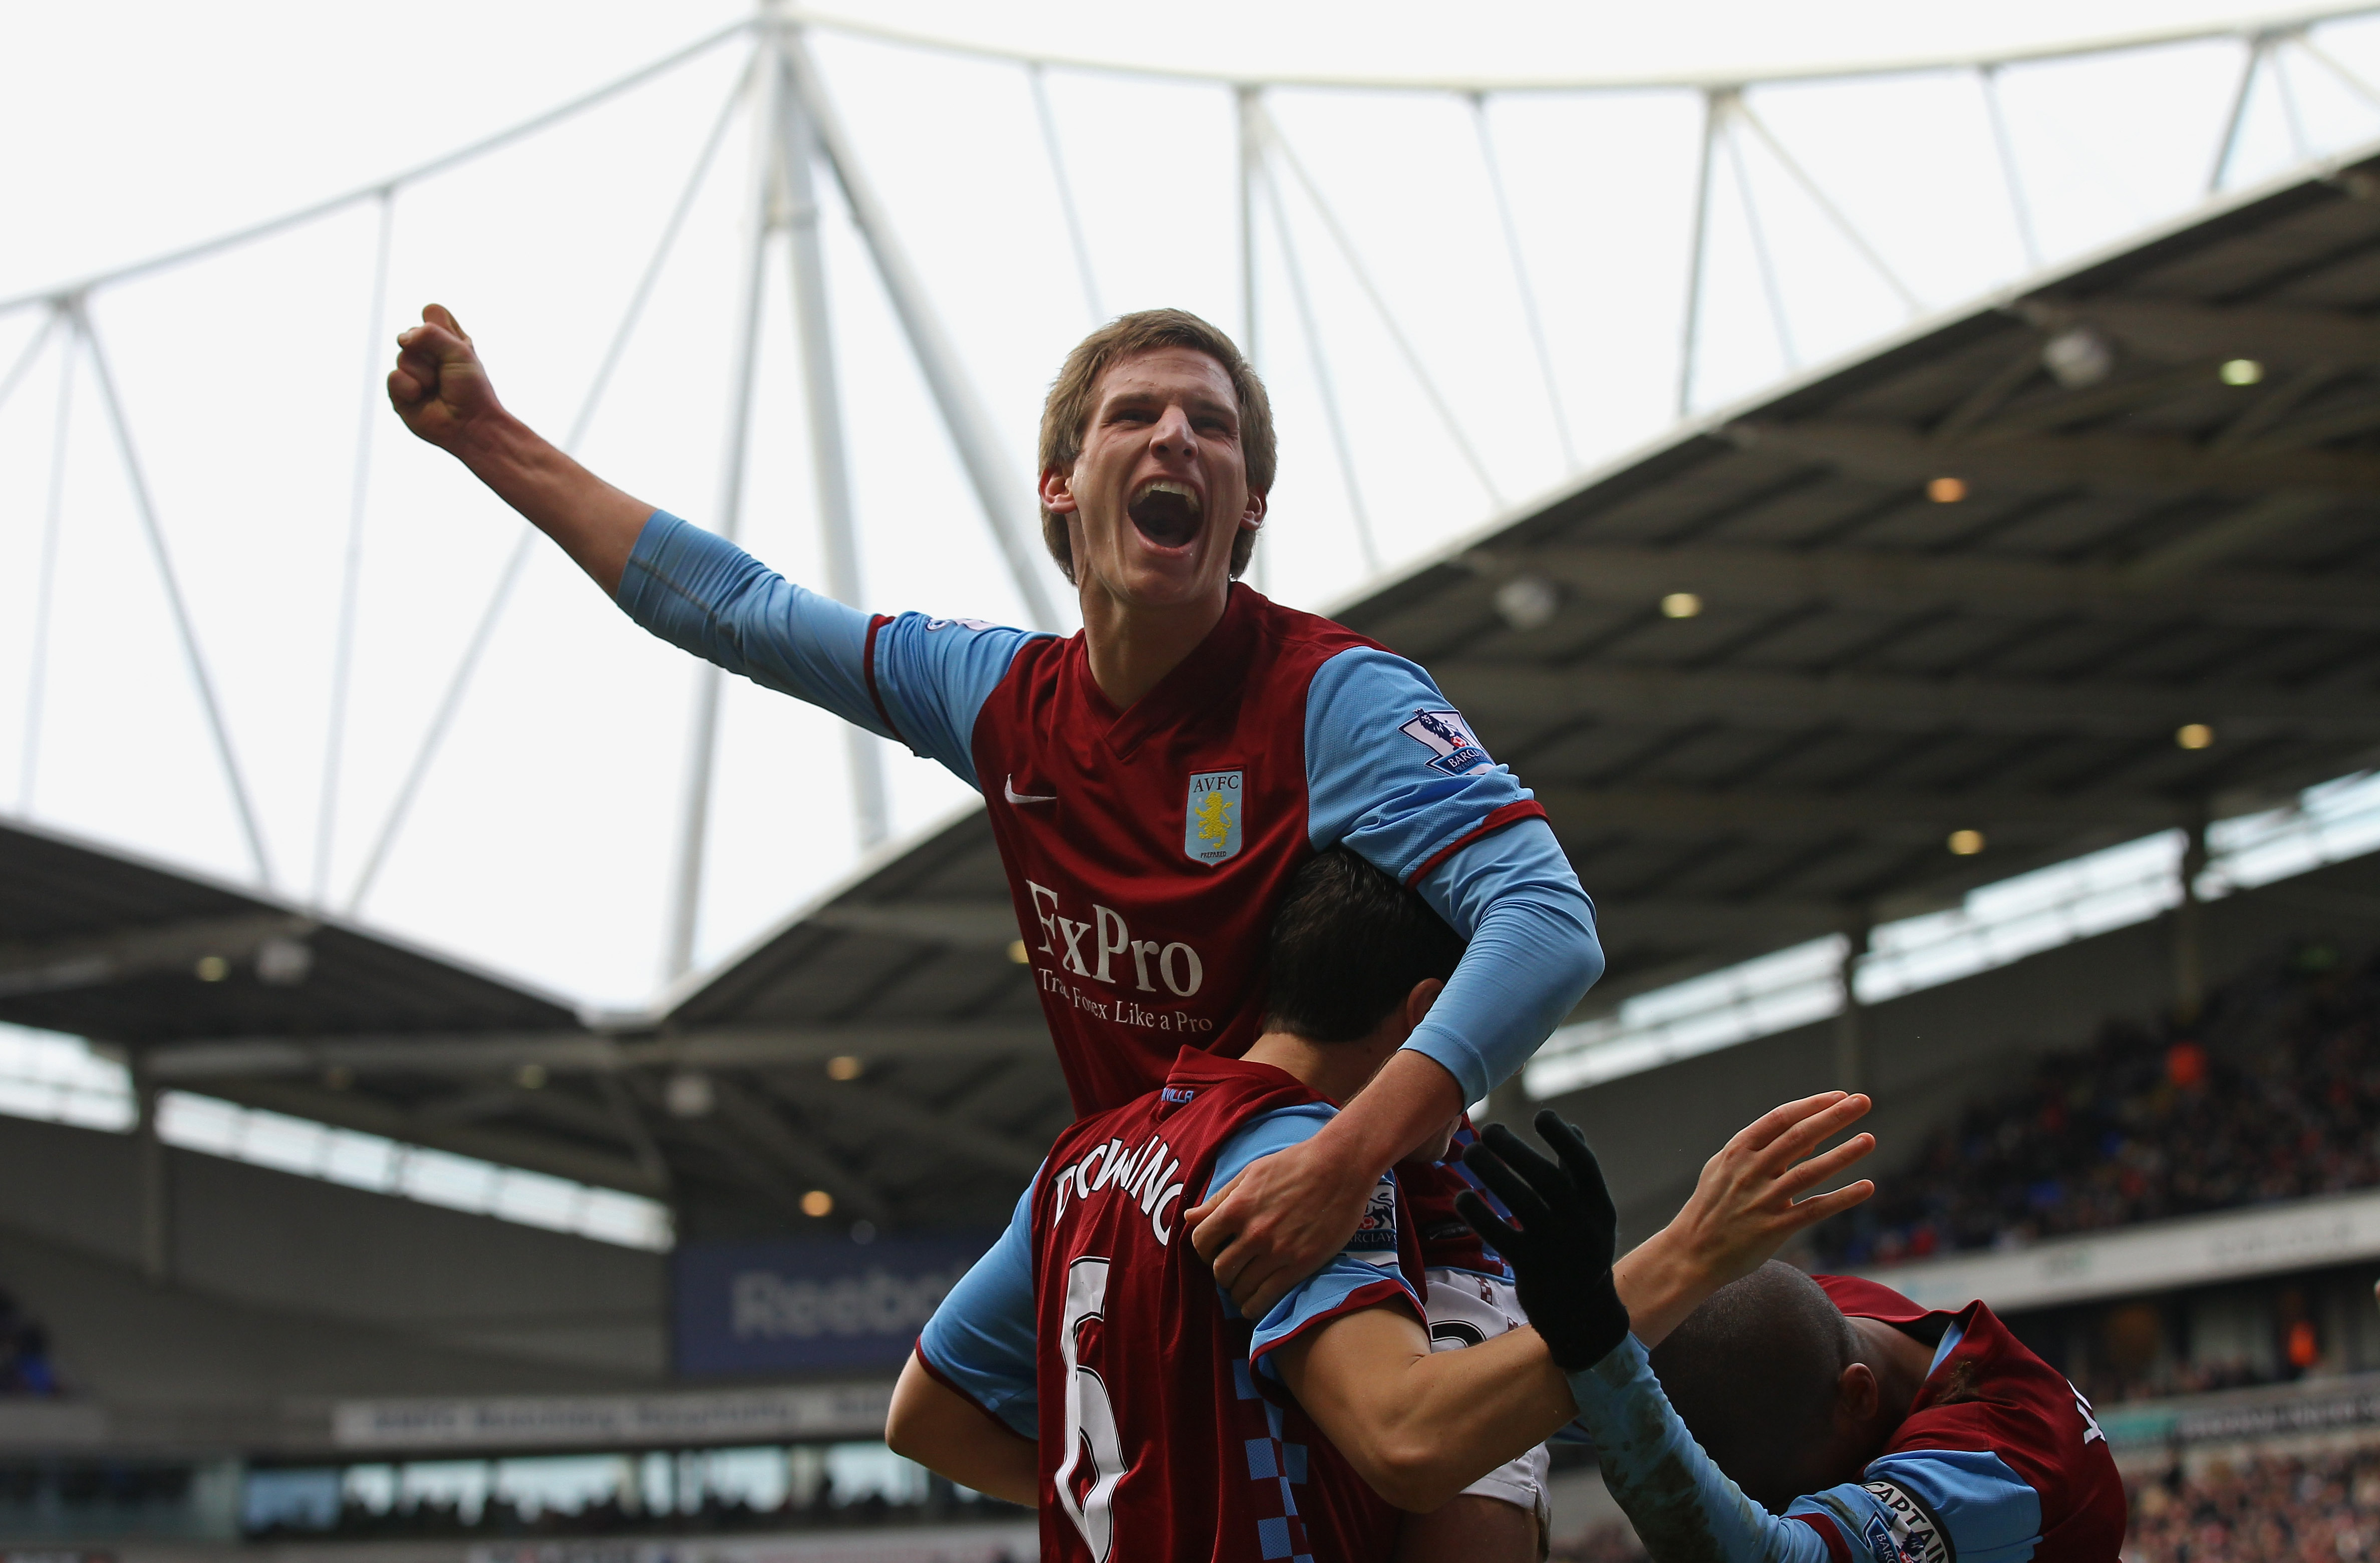 BOLTON, ENGLAND - MARCH 05:  Marc Albrighton of Aston Villa celebrates after scoring his goal during the Barclays Premier League match between Bolton Wanderers and Aston Villa at the Reebok Stadium on March 5, 2011 in Bolton, England.  (Photo by Alex Live